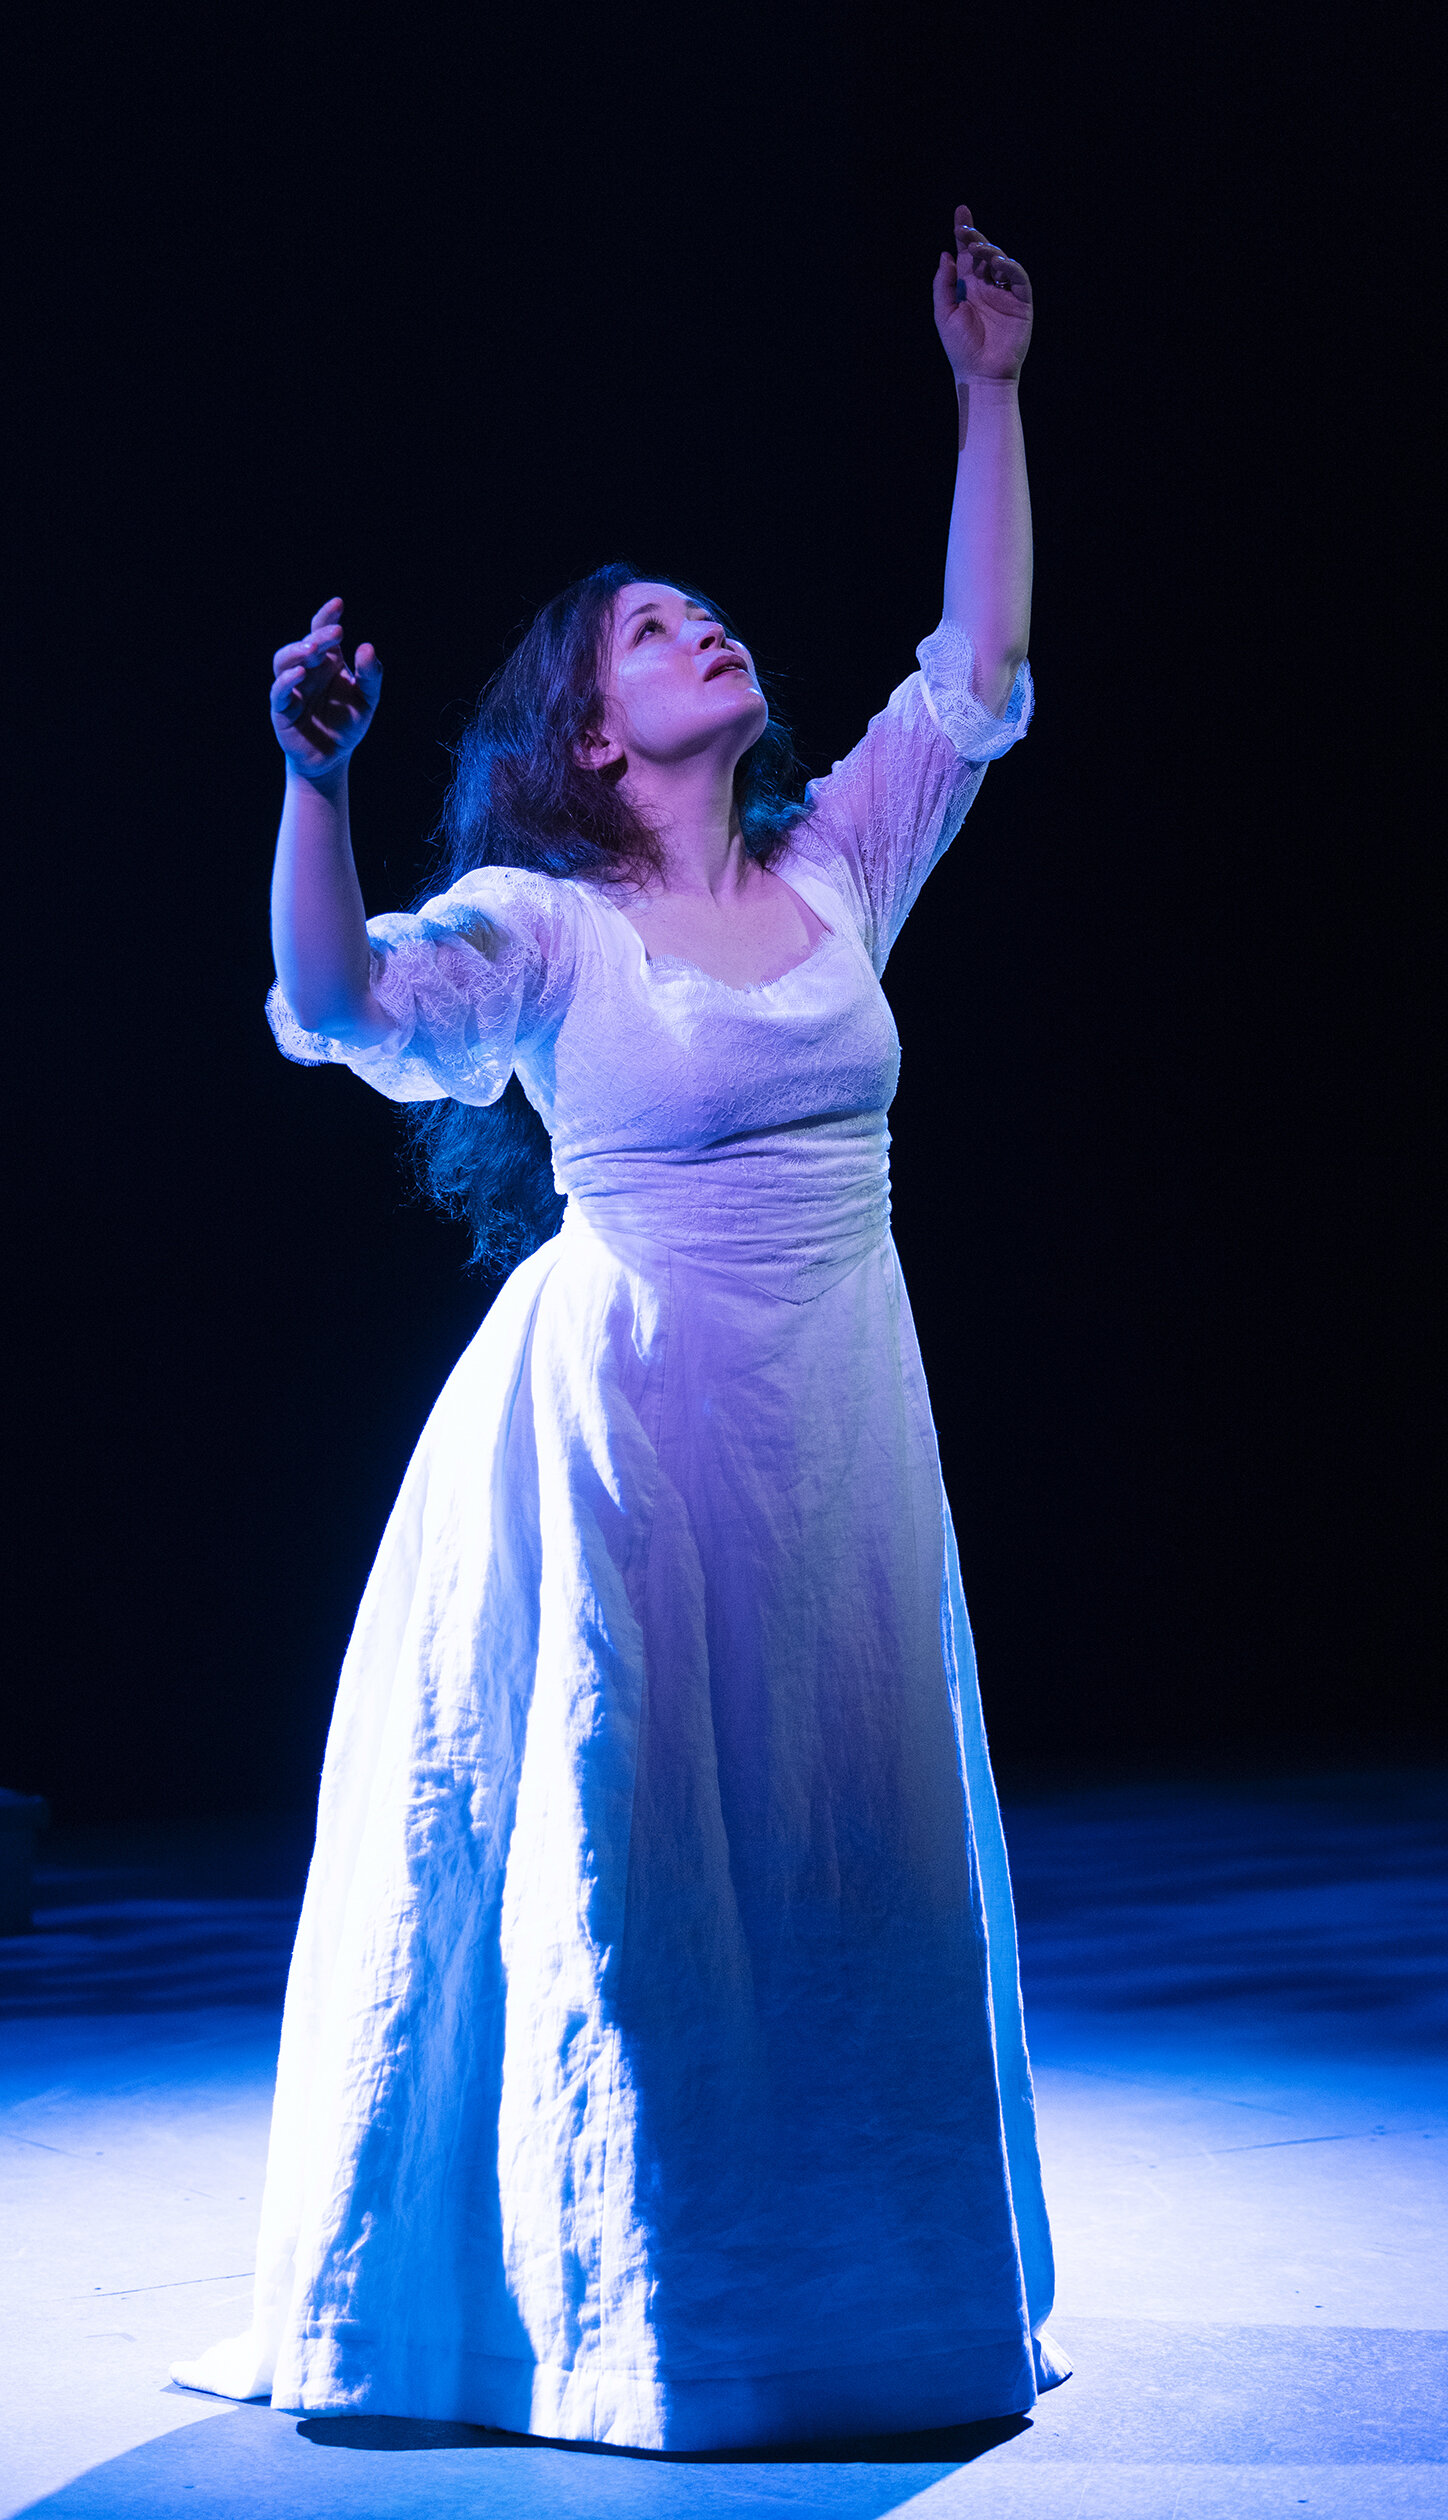 Bryn Booth as Edna Pontellier. Photo by Tim Fuller.